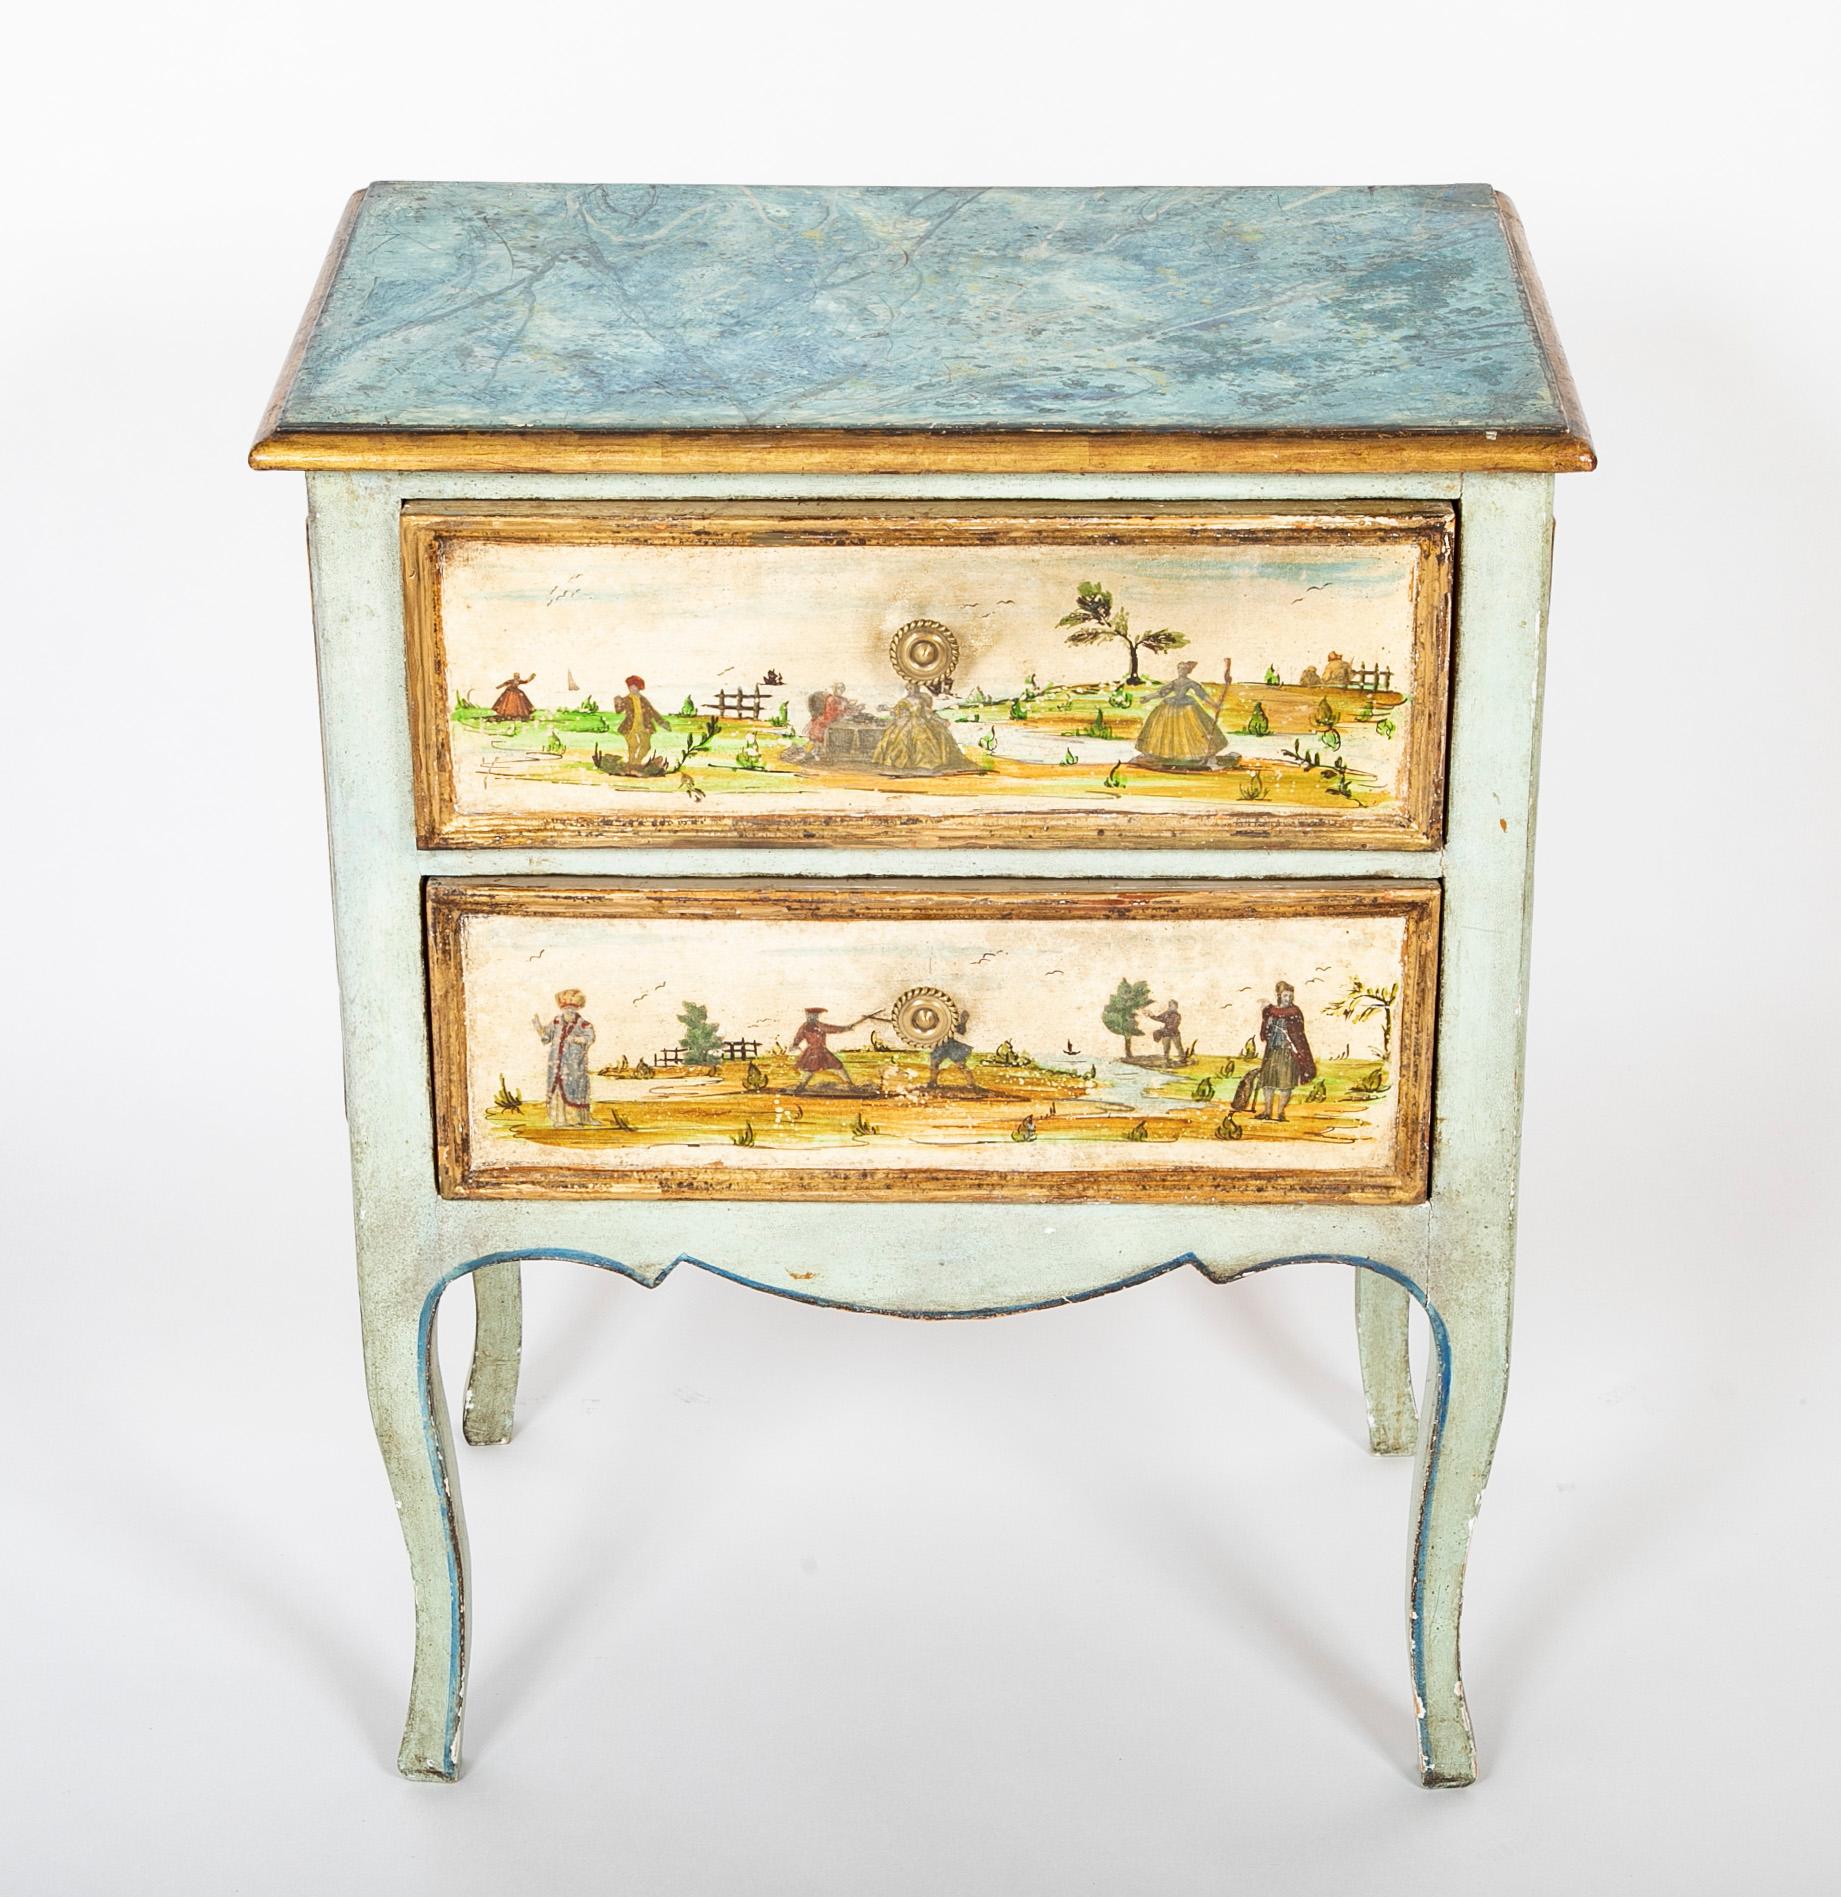 Charming pair of 19th century Italian painted and Lacca Povera small scale two drawer commodes in the 18th century Venetian style. Each with various scenes on the drawer fronts and sides in the graceful and naive style typical of lacca povera. The